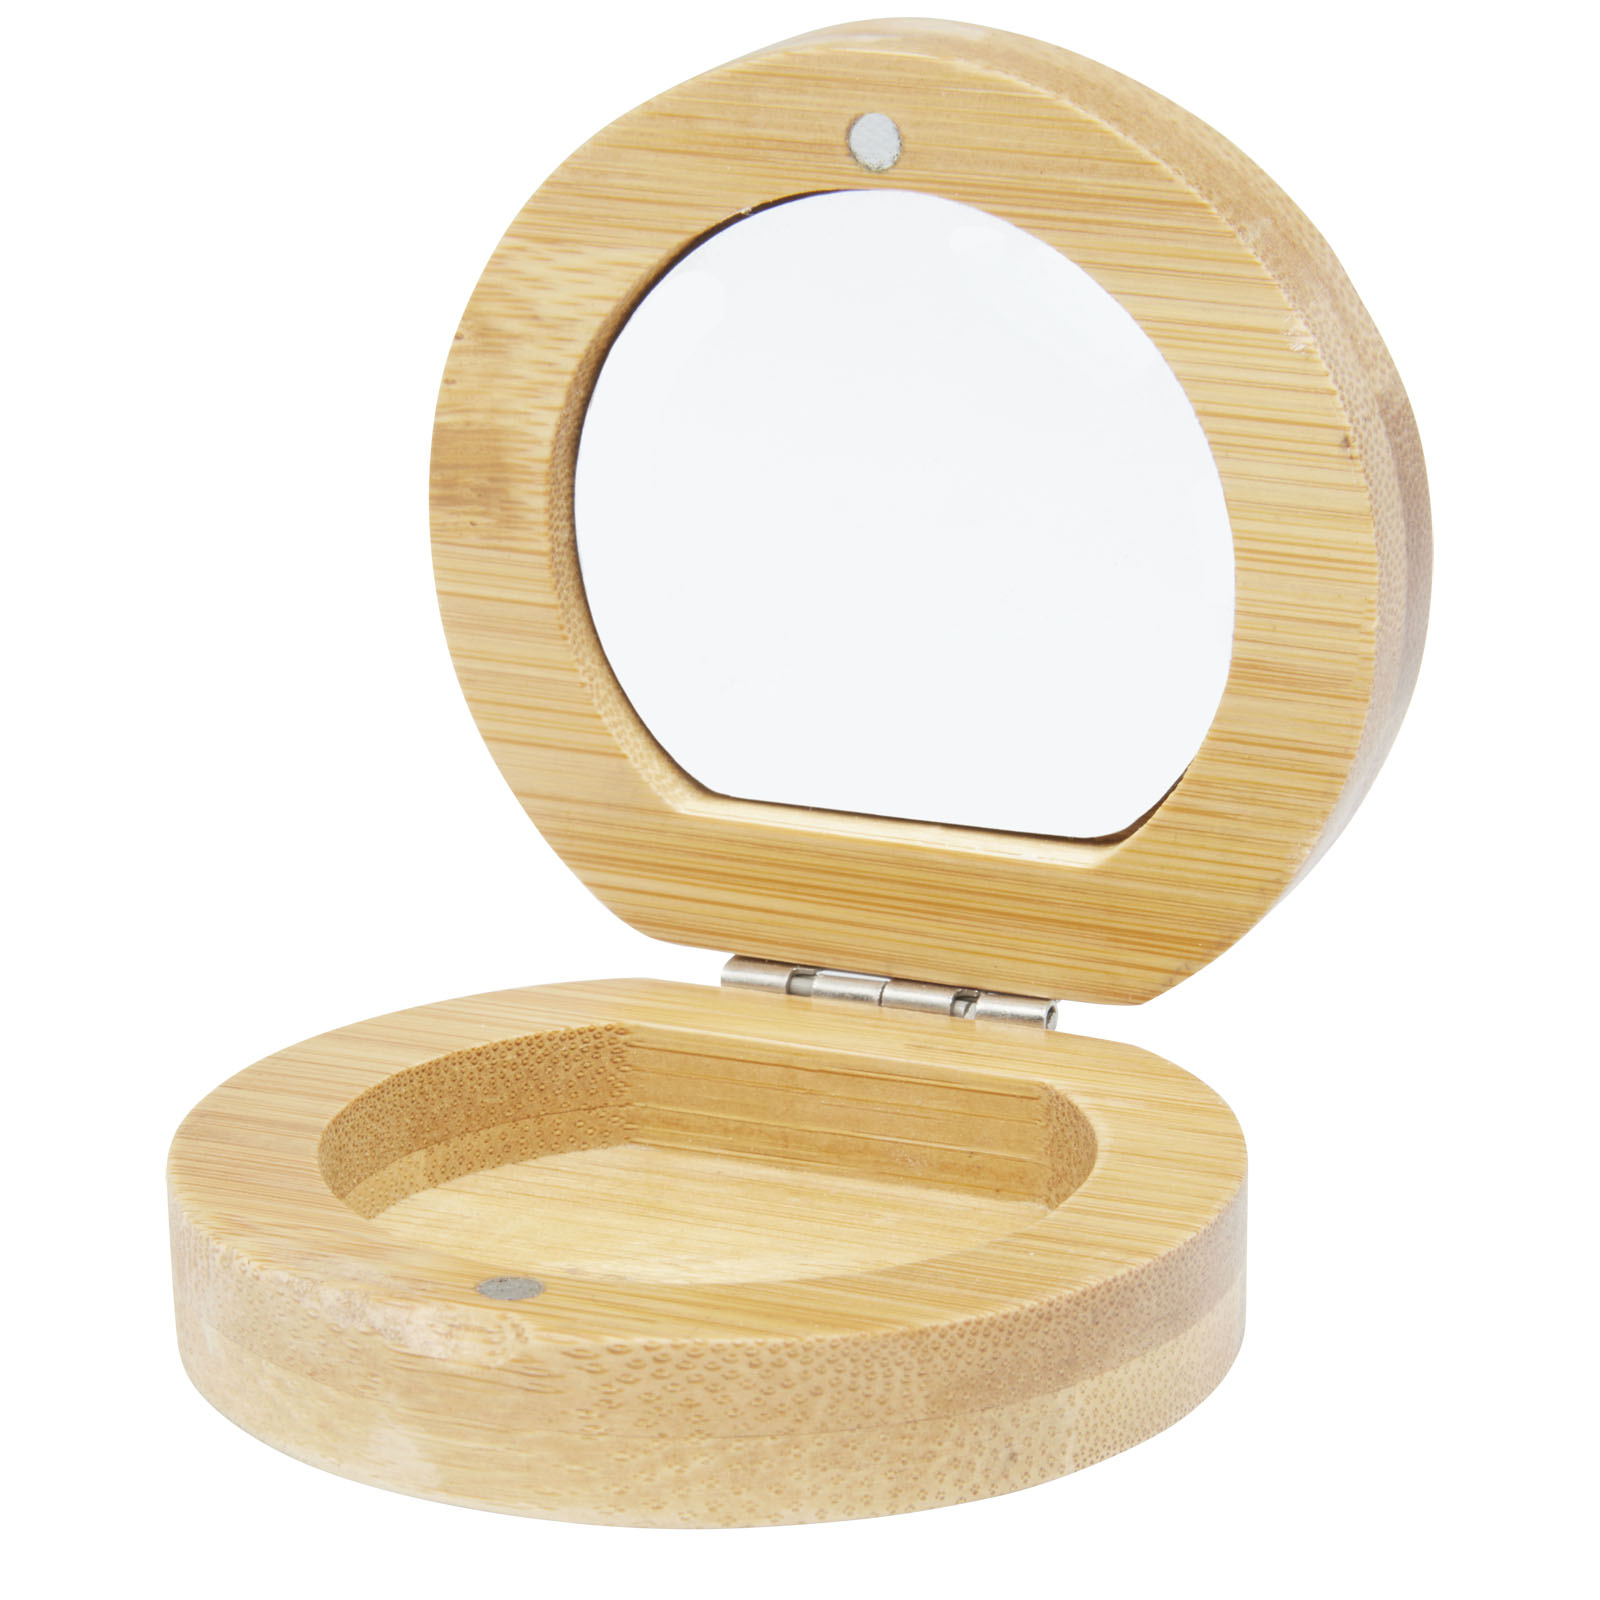 Advertising Personal Care - Afrodit bamboo pocket mirror - 0